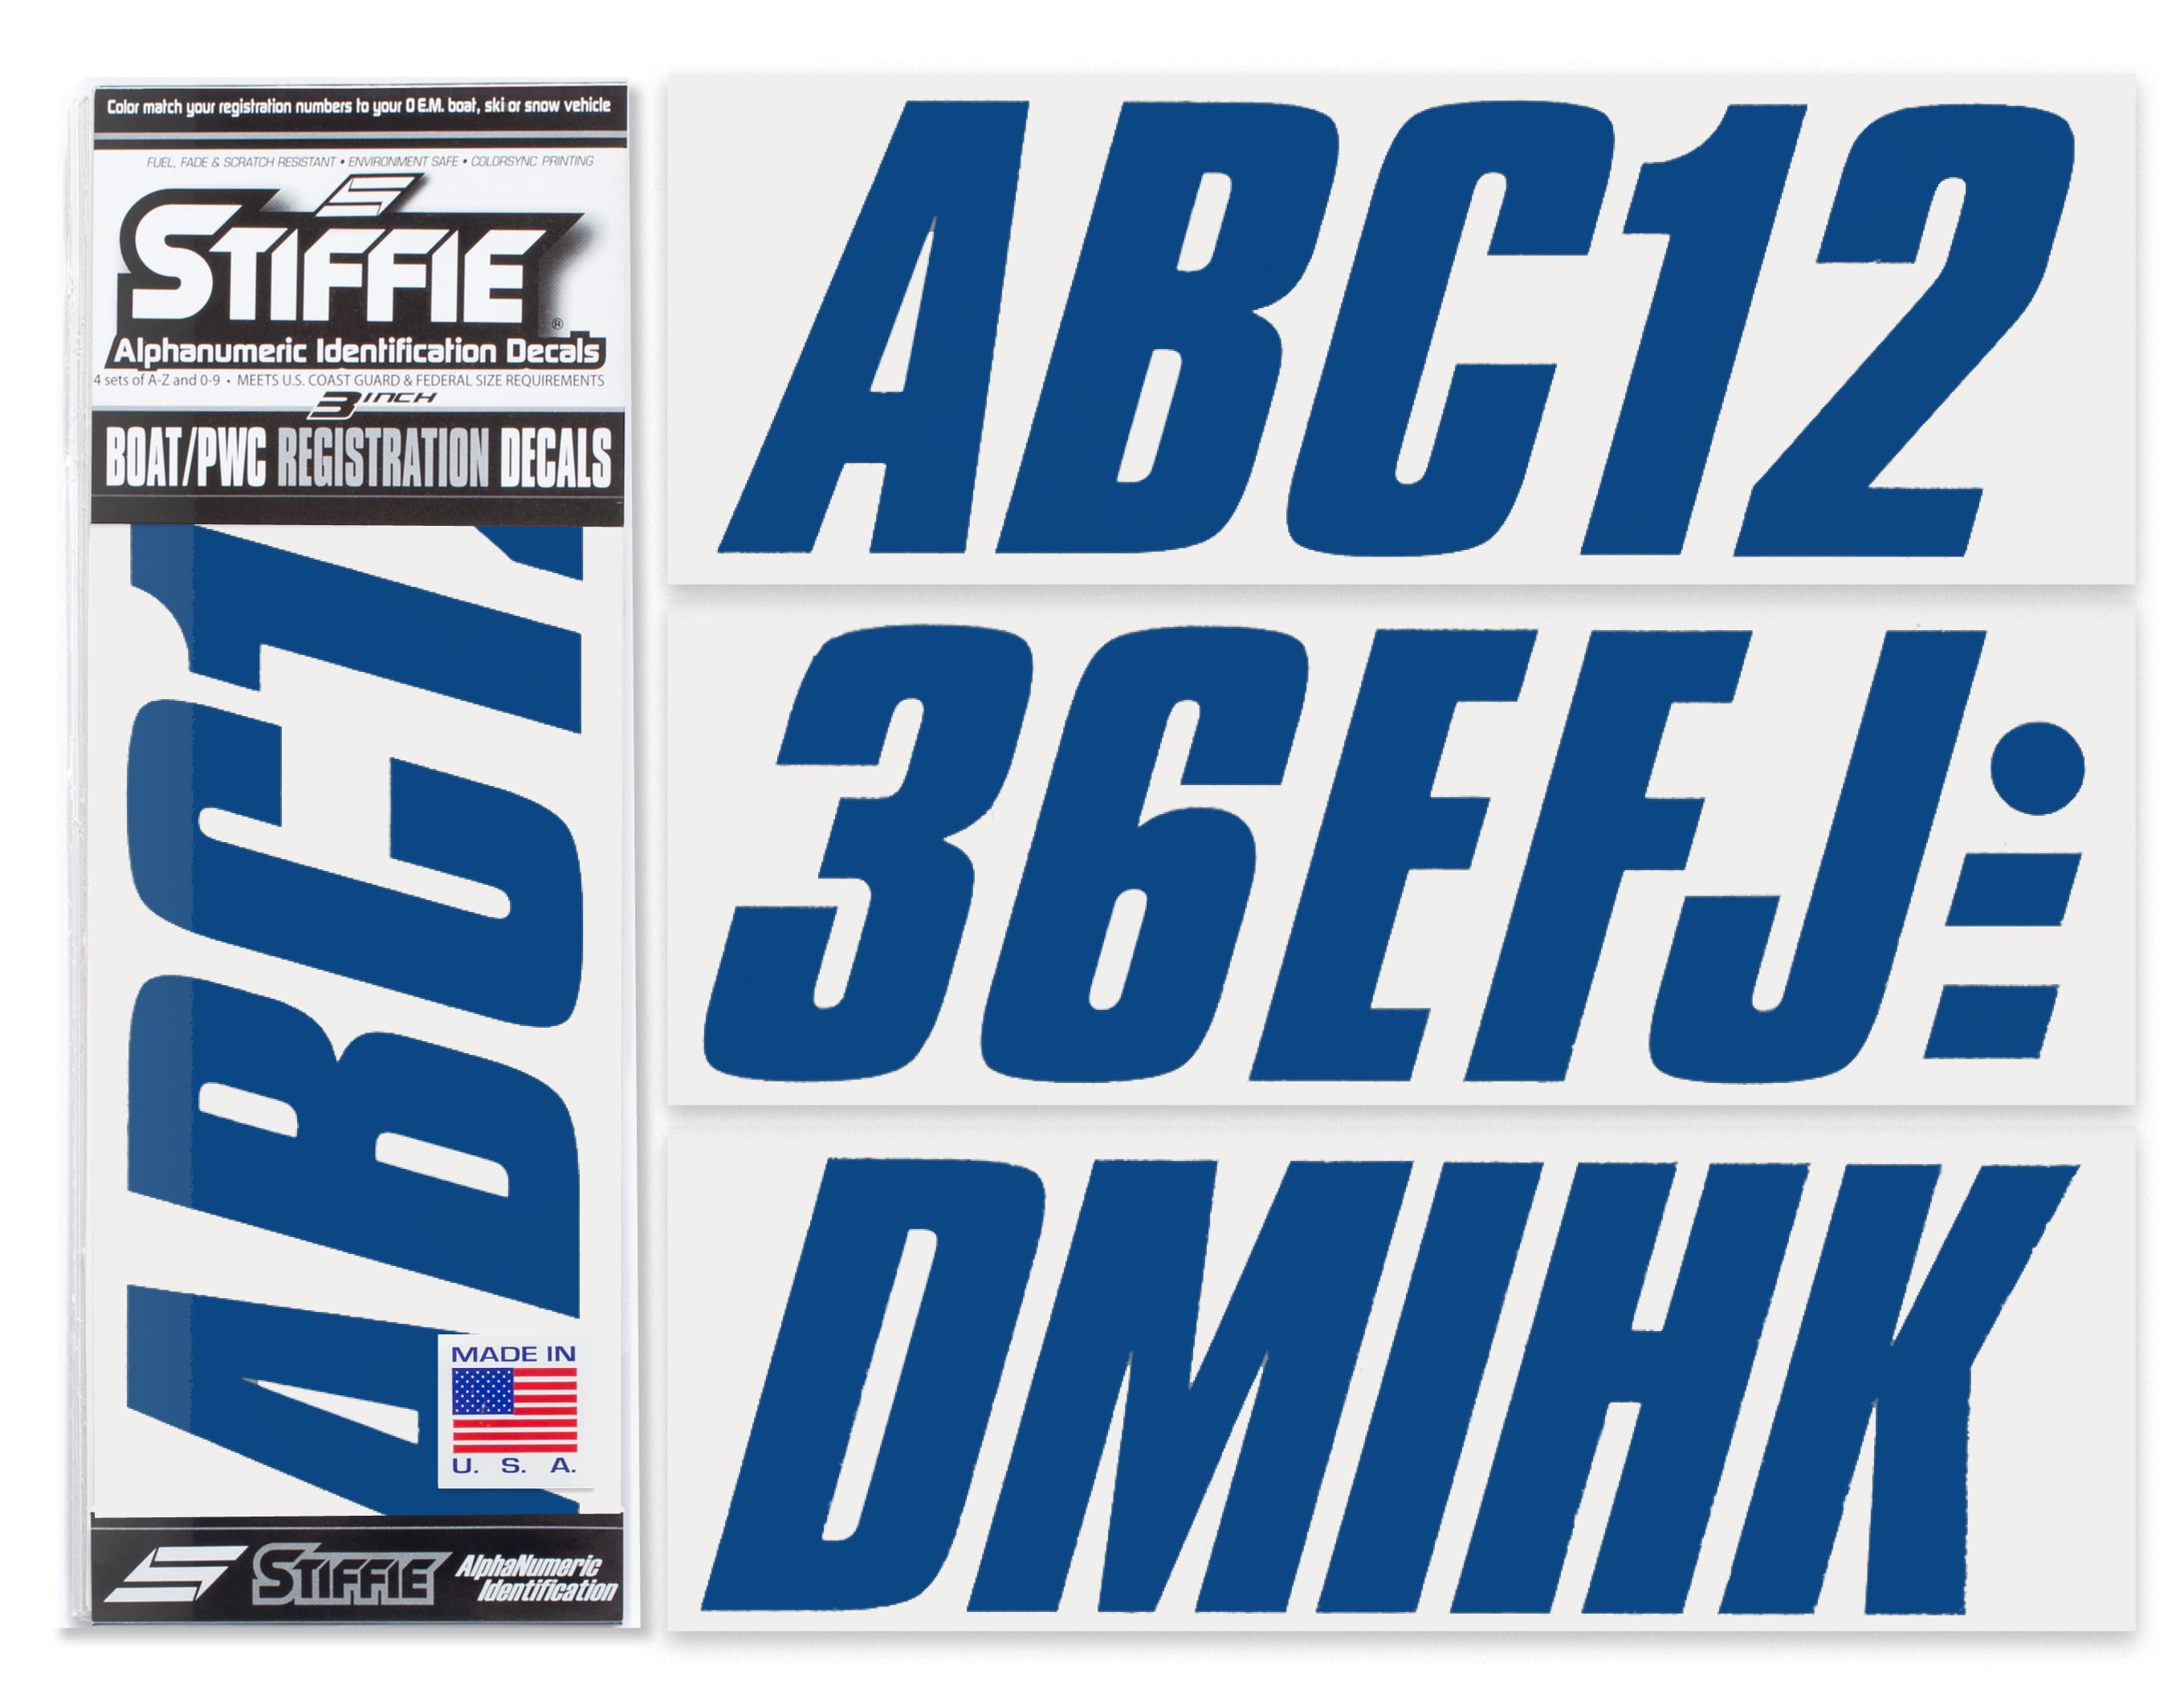 STIFFIE Whip-One WO24 CARBON Identification Boat Decal Registration Numbers Bass 